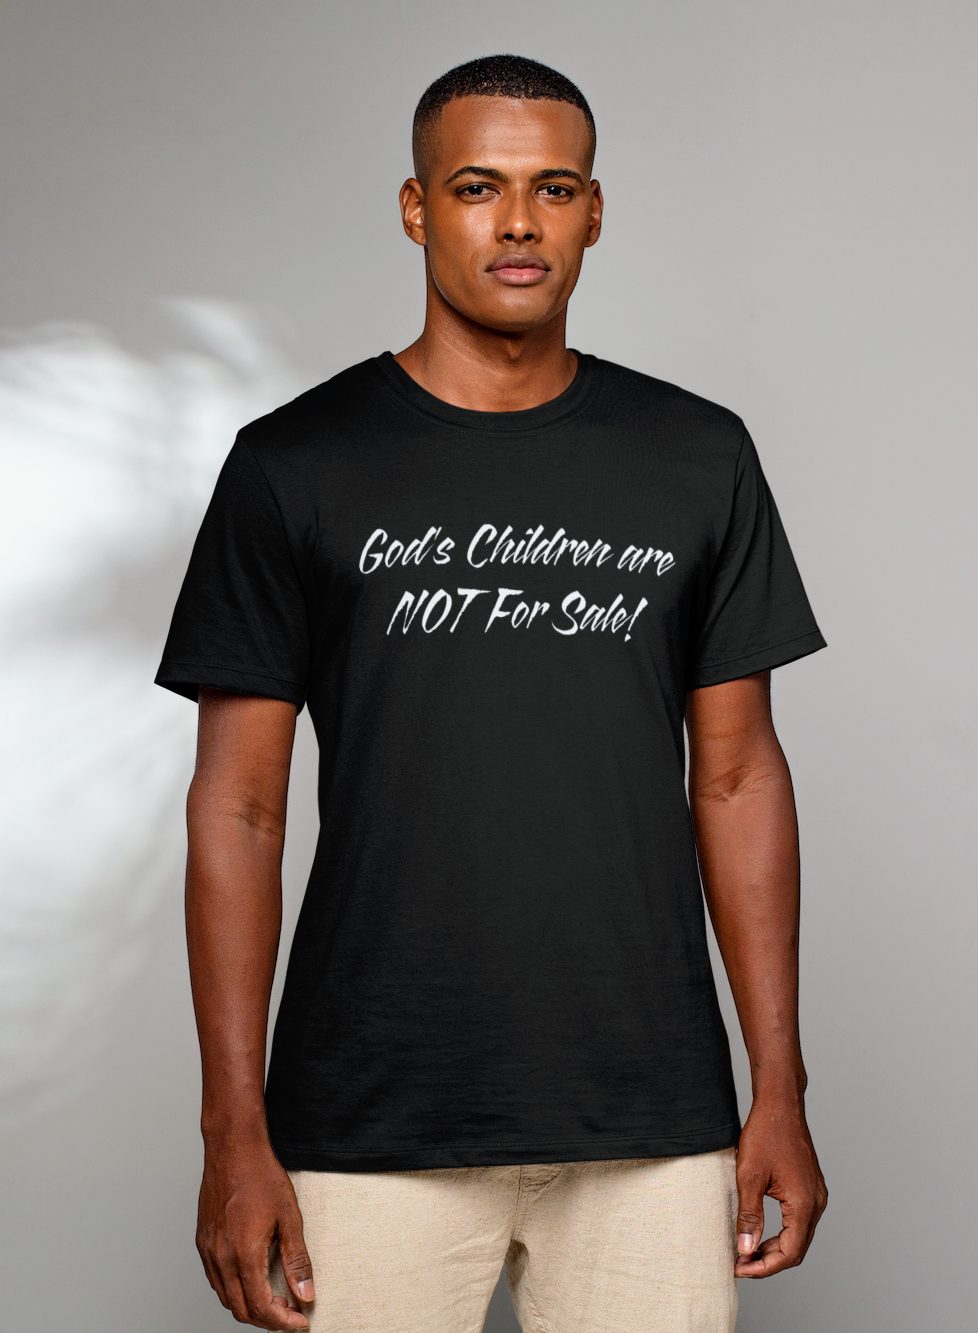 God's Children are NOT for sale Tshirt – Born² Designs